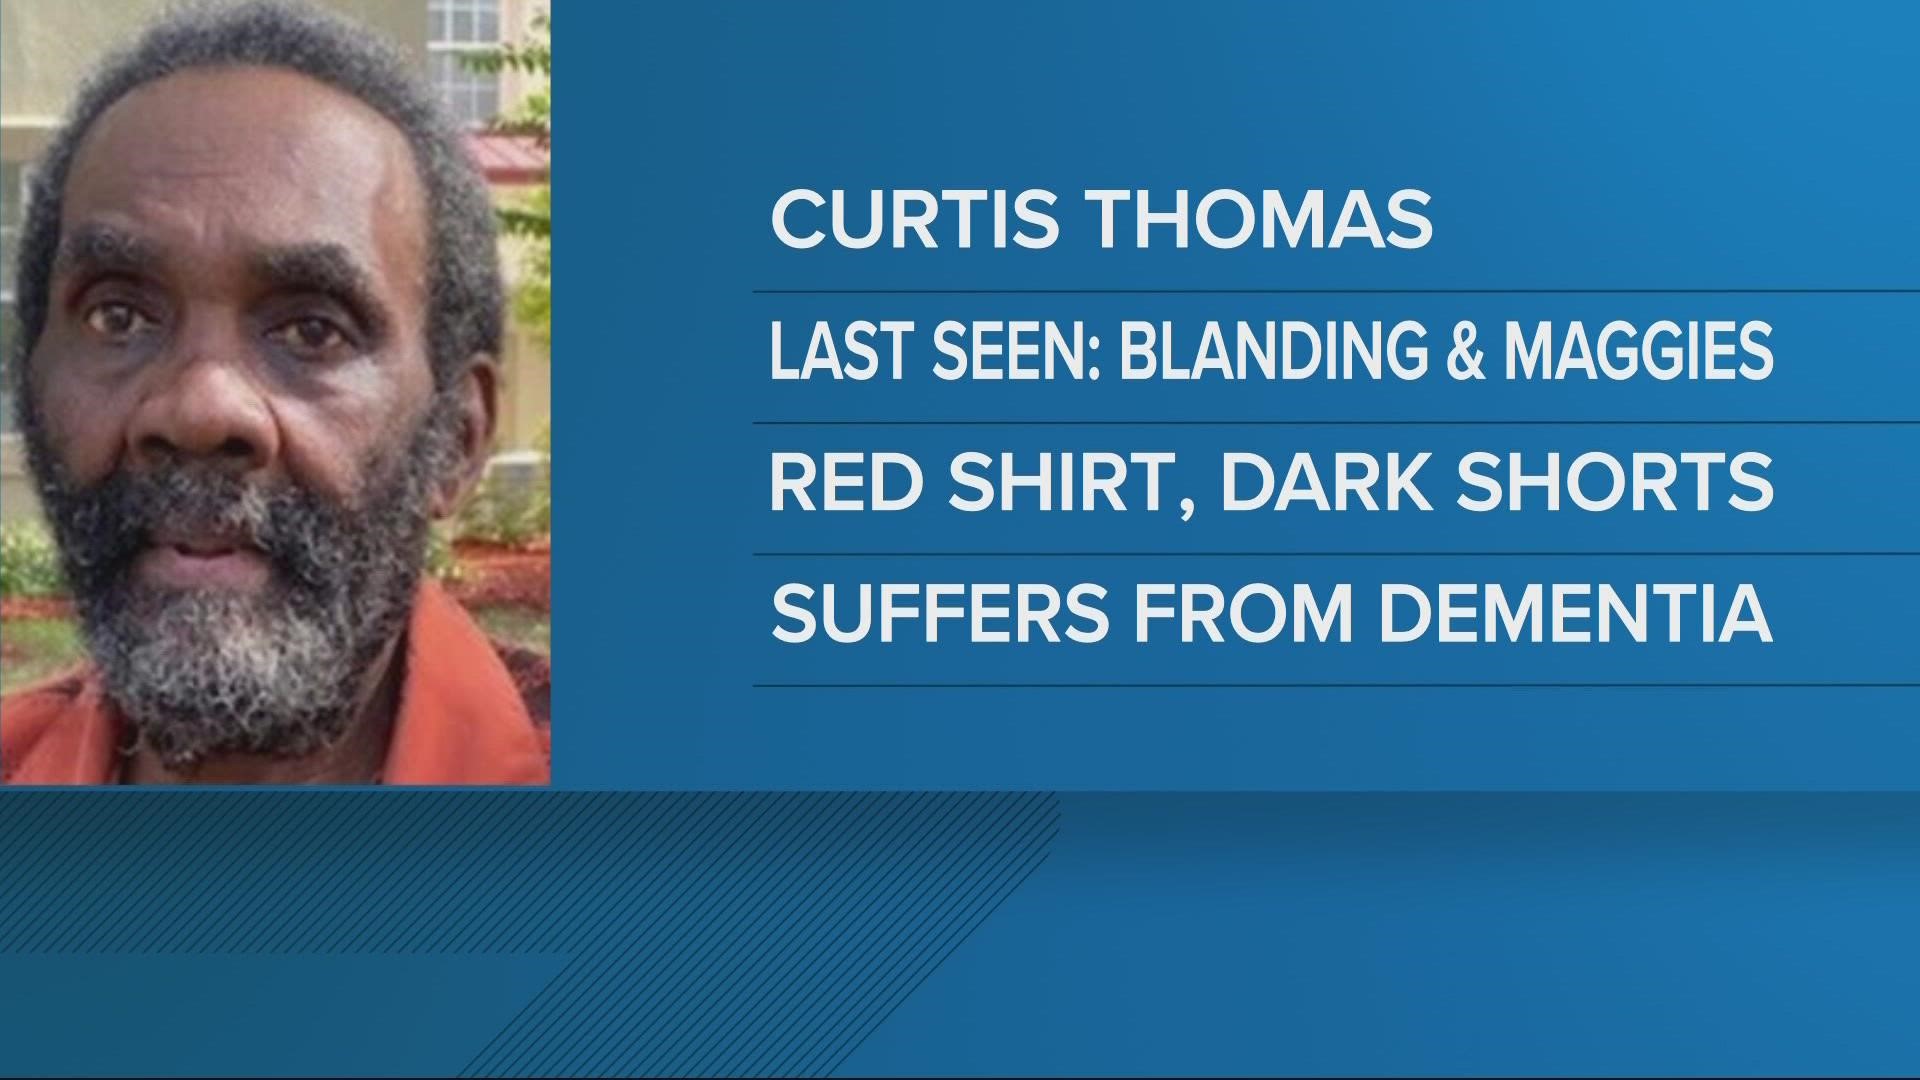 He was reportedly last seen at his home near Blanding Blvd and Maggies Lane.